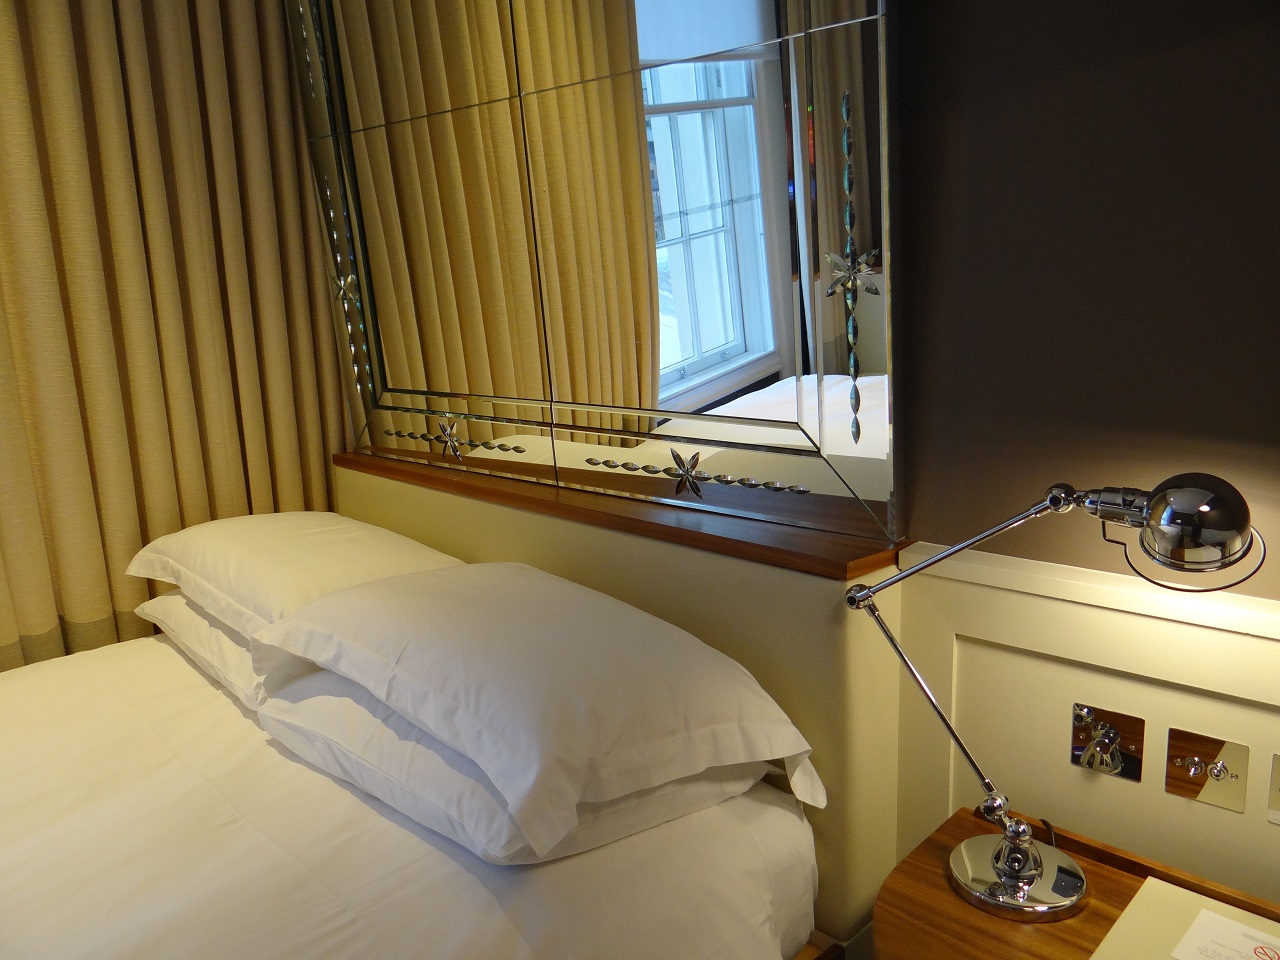 Great Northern Hotel London Couchette room